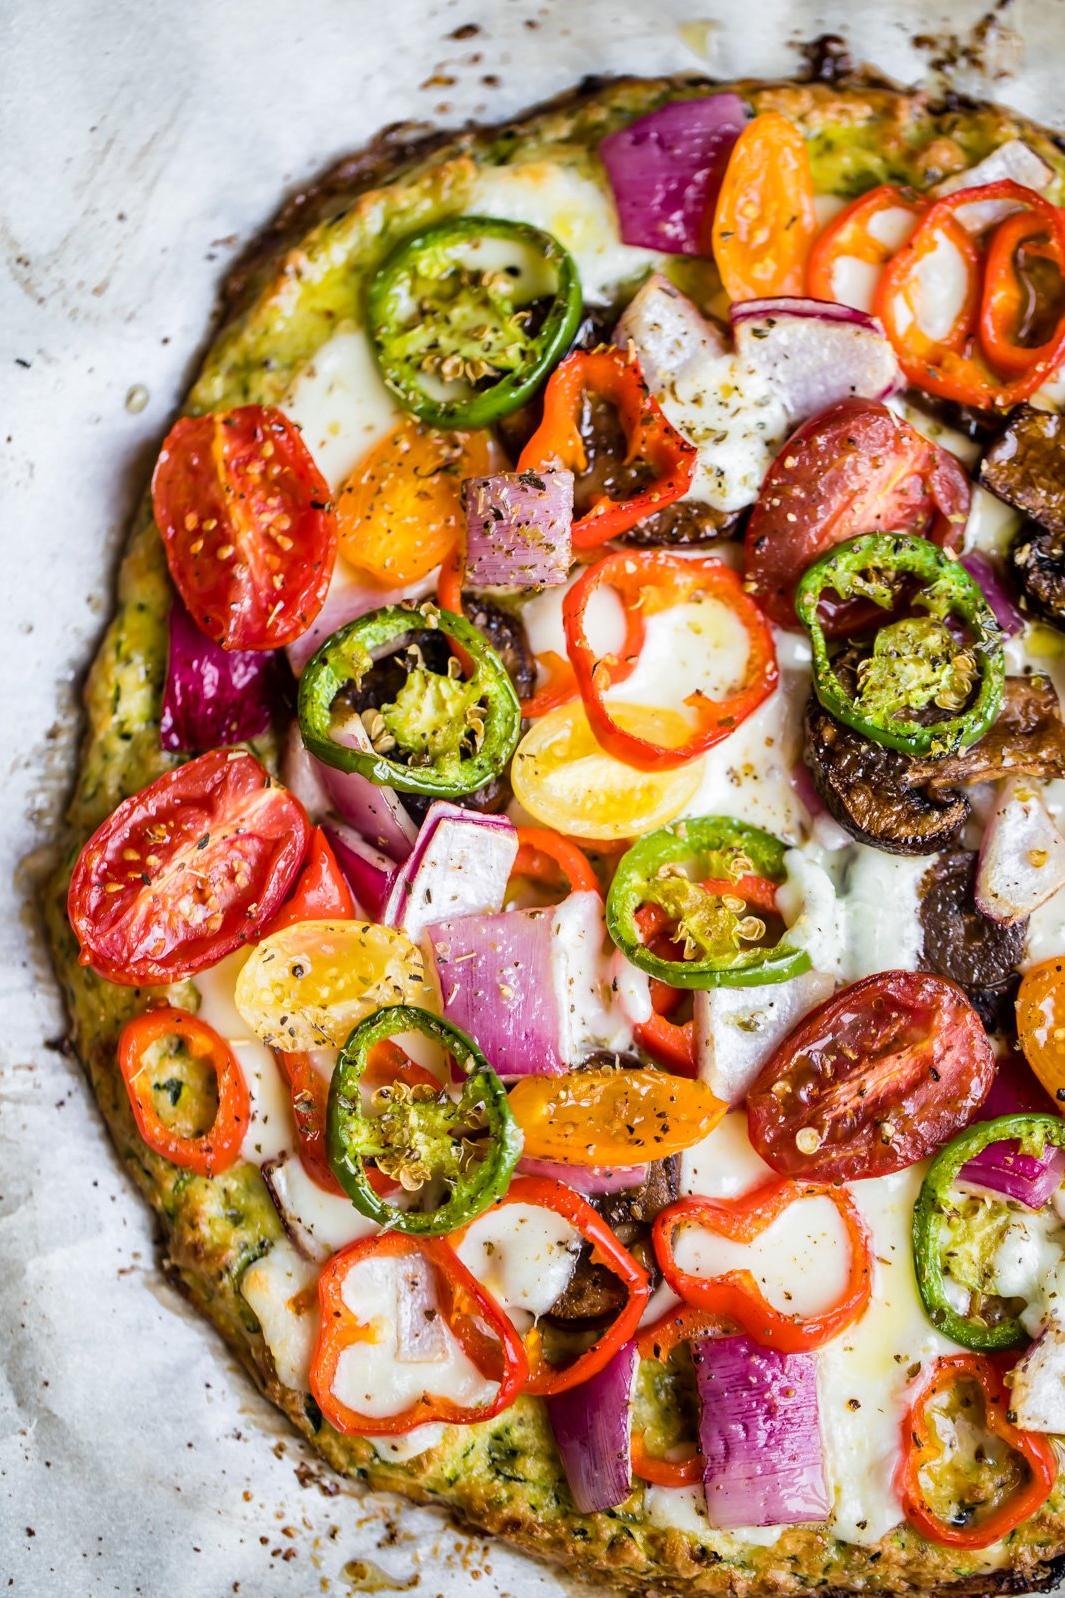  Say hello to a low-carb, veggie-packed crust loaded with flavor and nutrition.